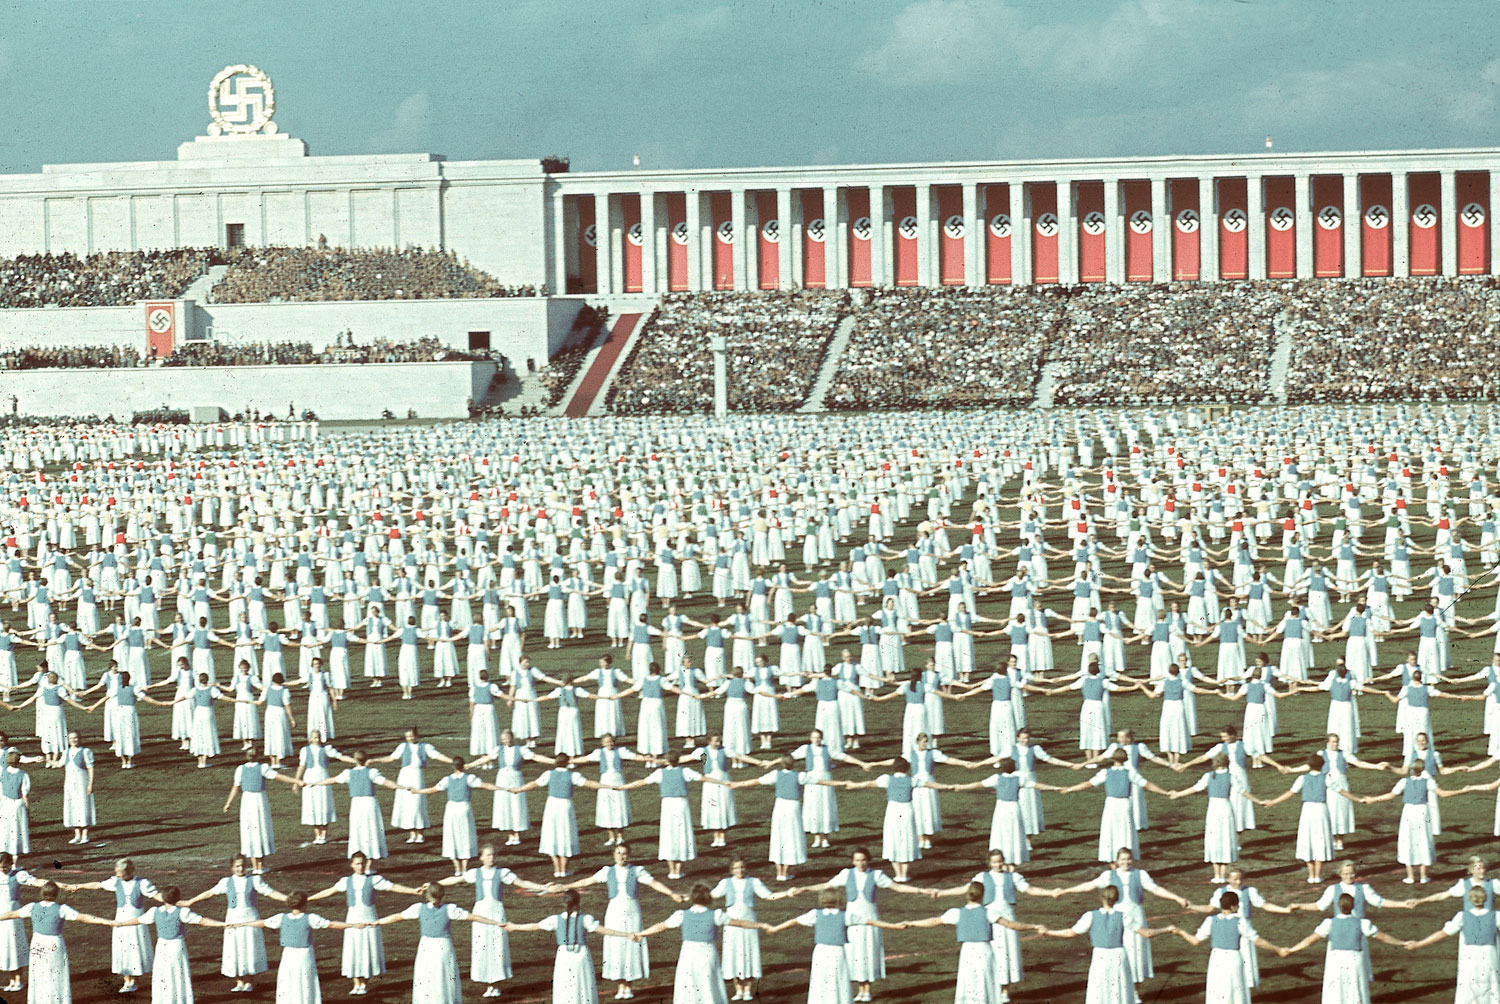 League of German Girls dancing during the 1938 Reich Party Congress, Nuremberg, Germany.